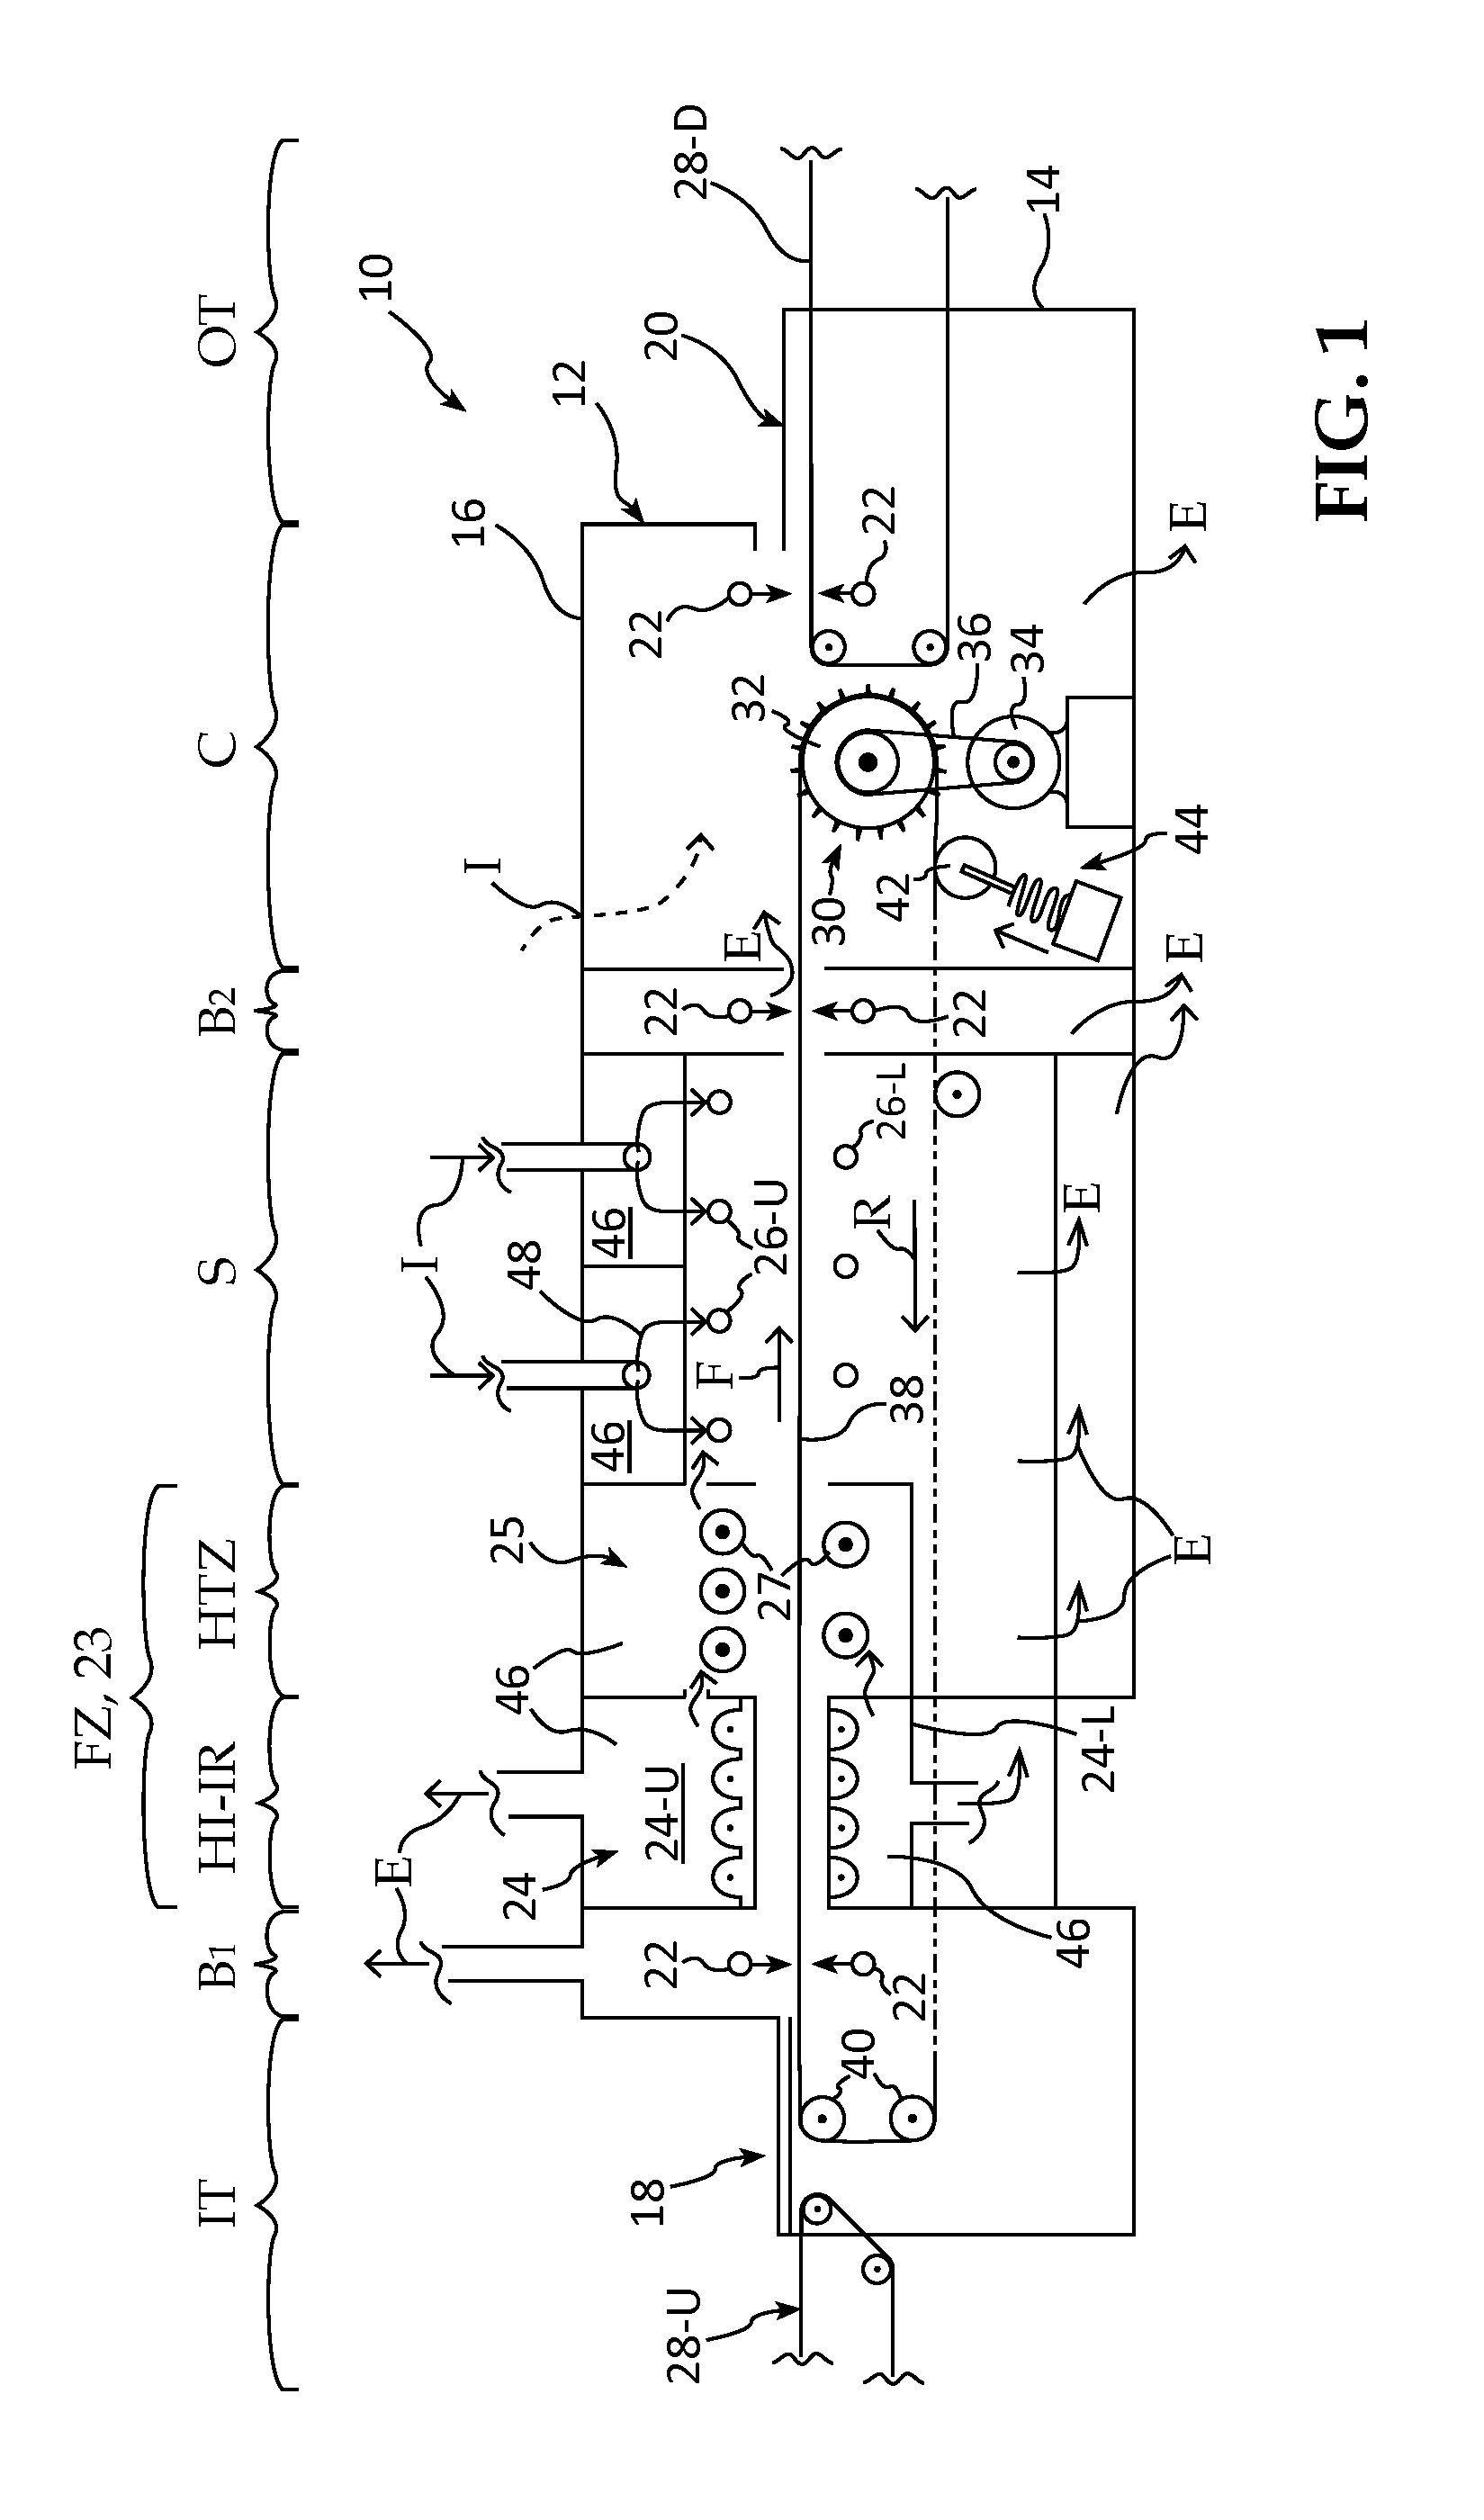 Diffusion furnaces employing ultra low mass transport systems and methods of wafer rapid diffusion processing